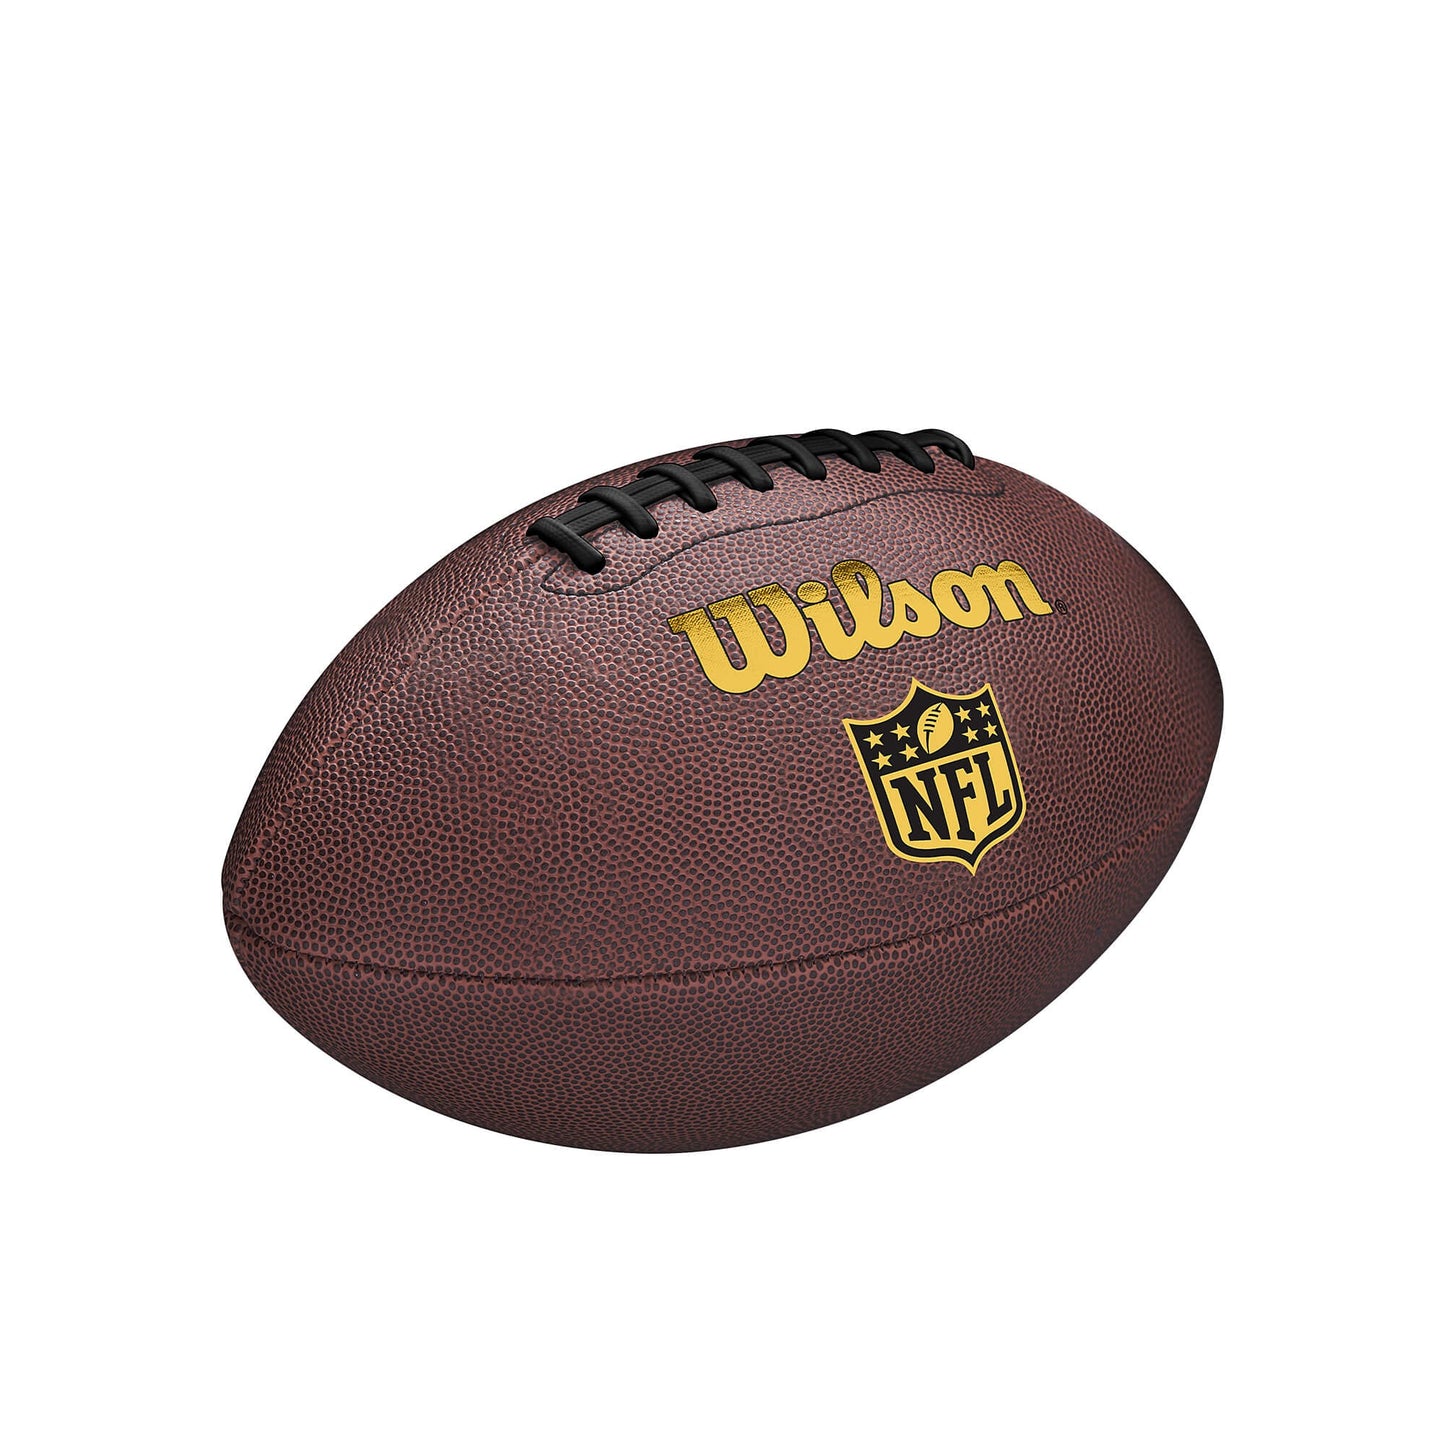 Wilson NFL Tailgate FB Off Brown (sz. Official)